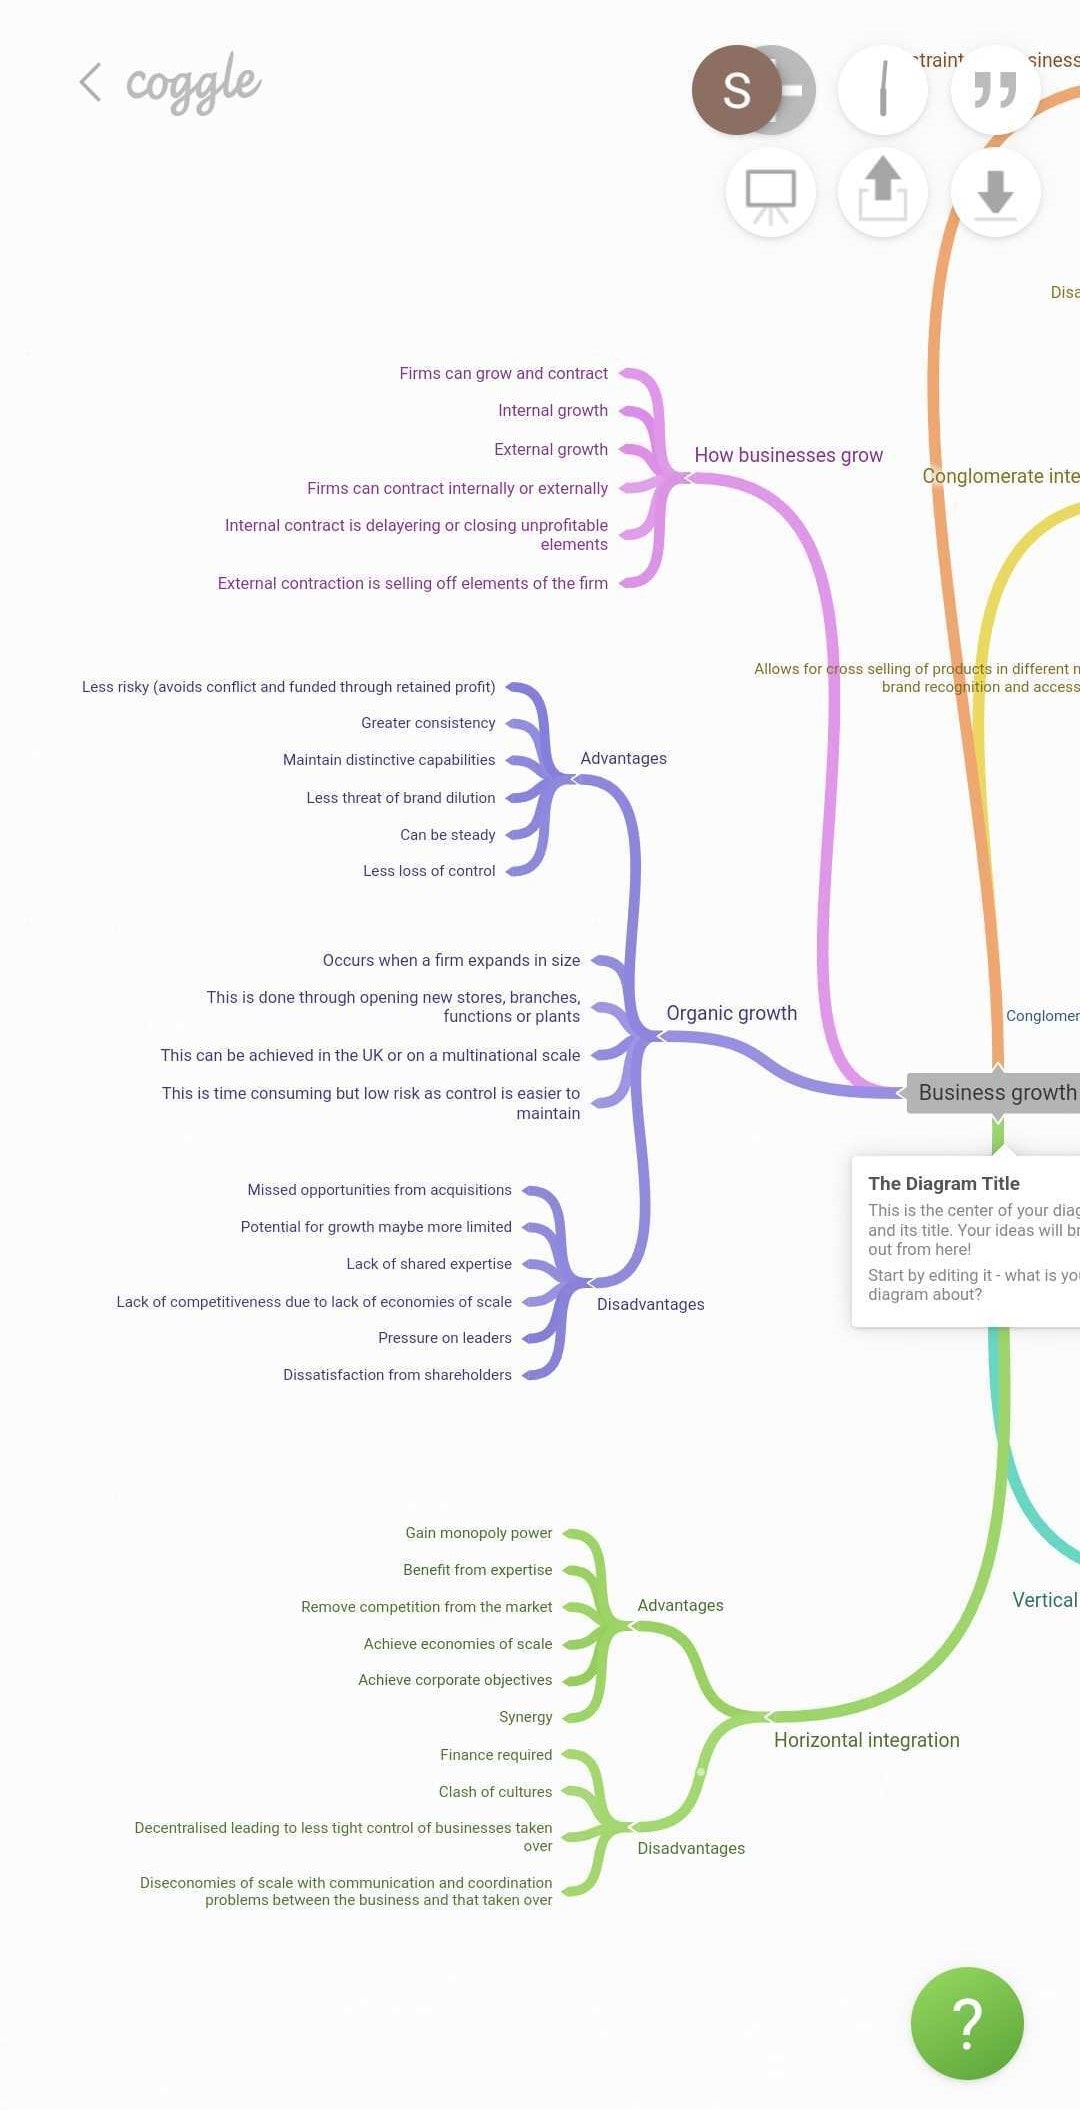 coggle online mind map interface